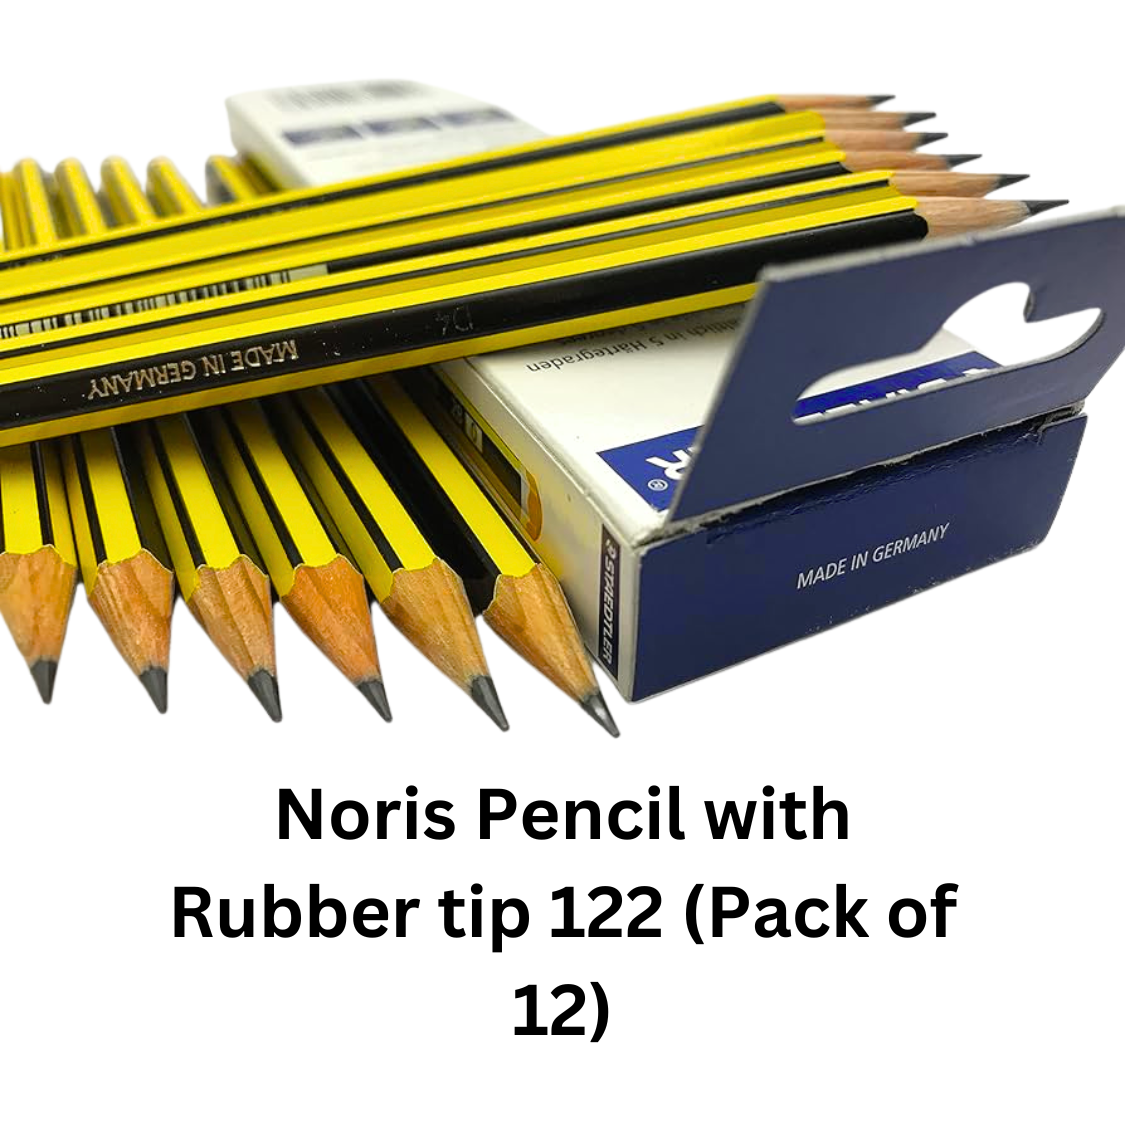 Noris Pencil with Rubber tip 122 (Pack of 12)